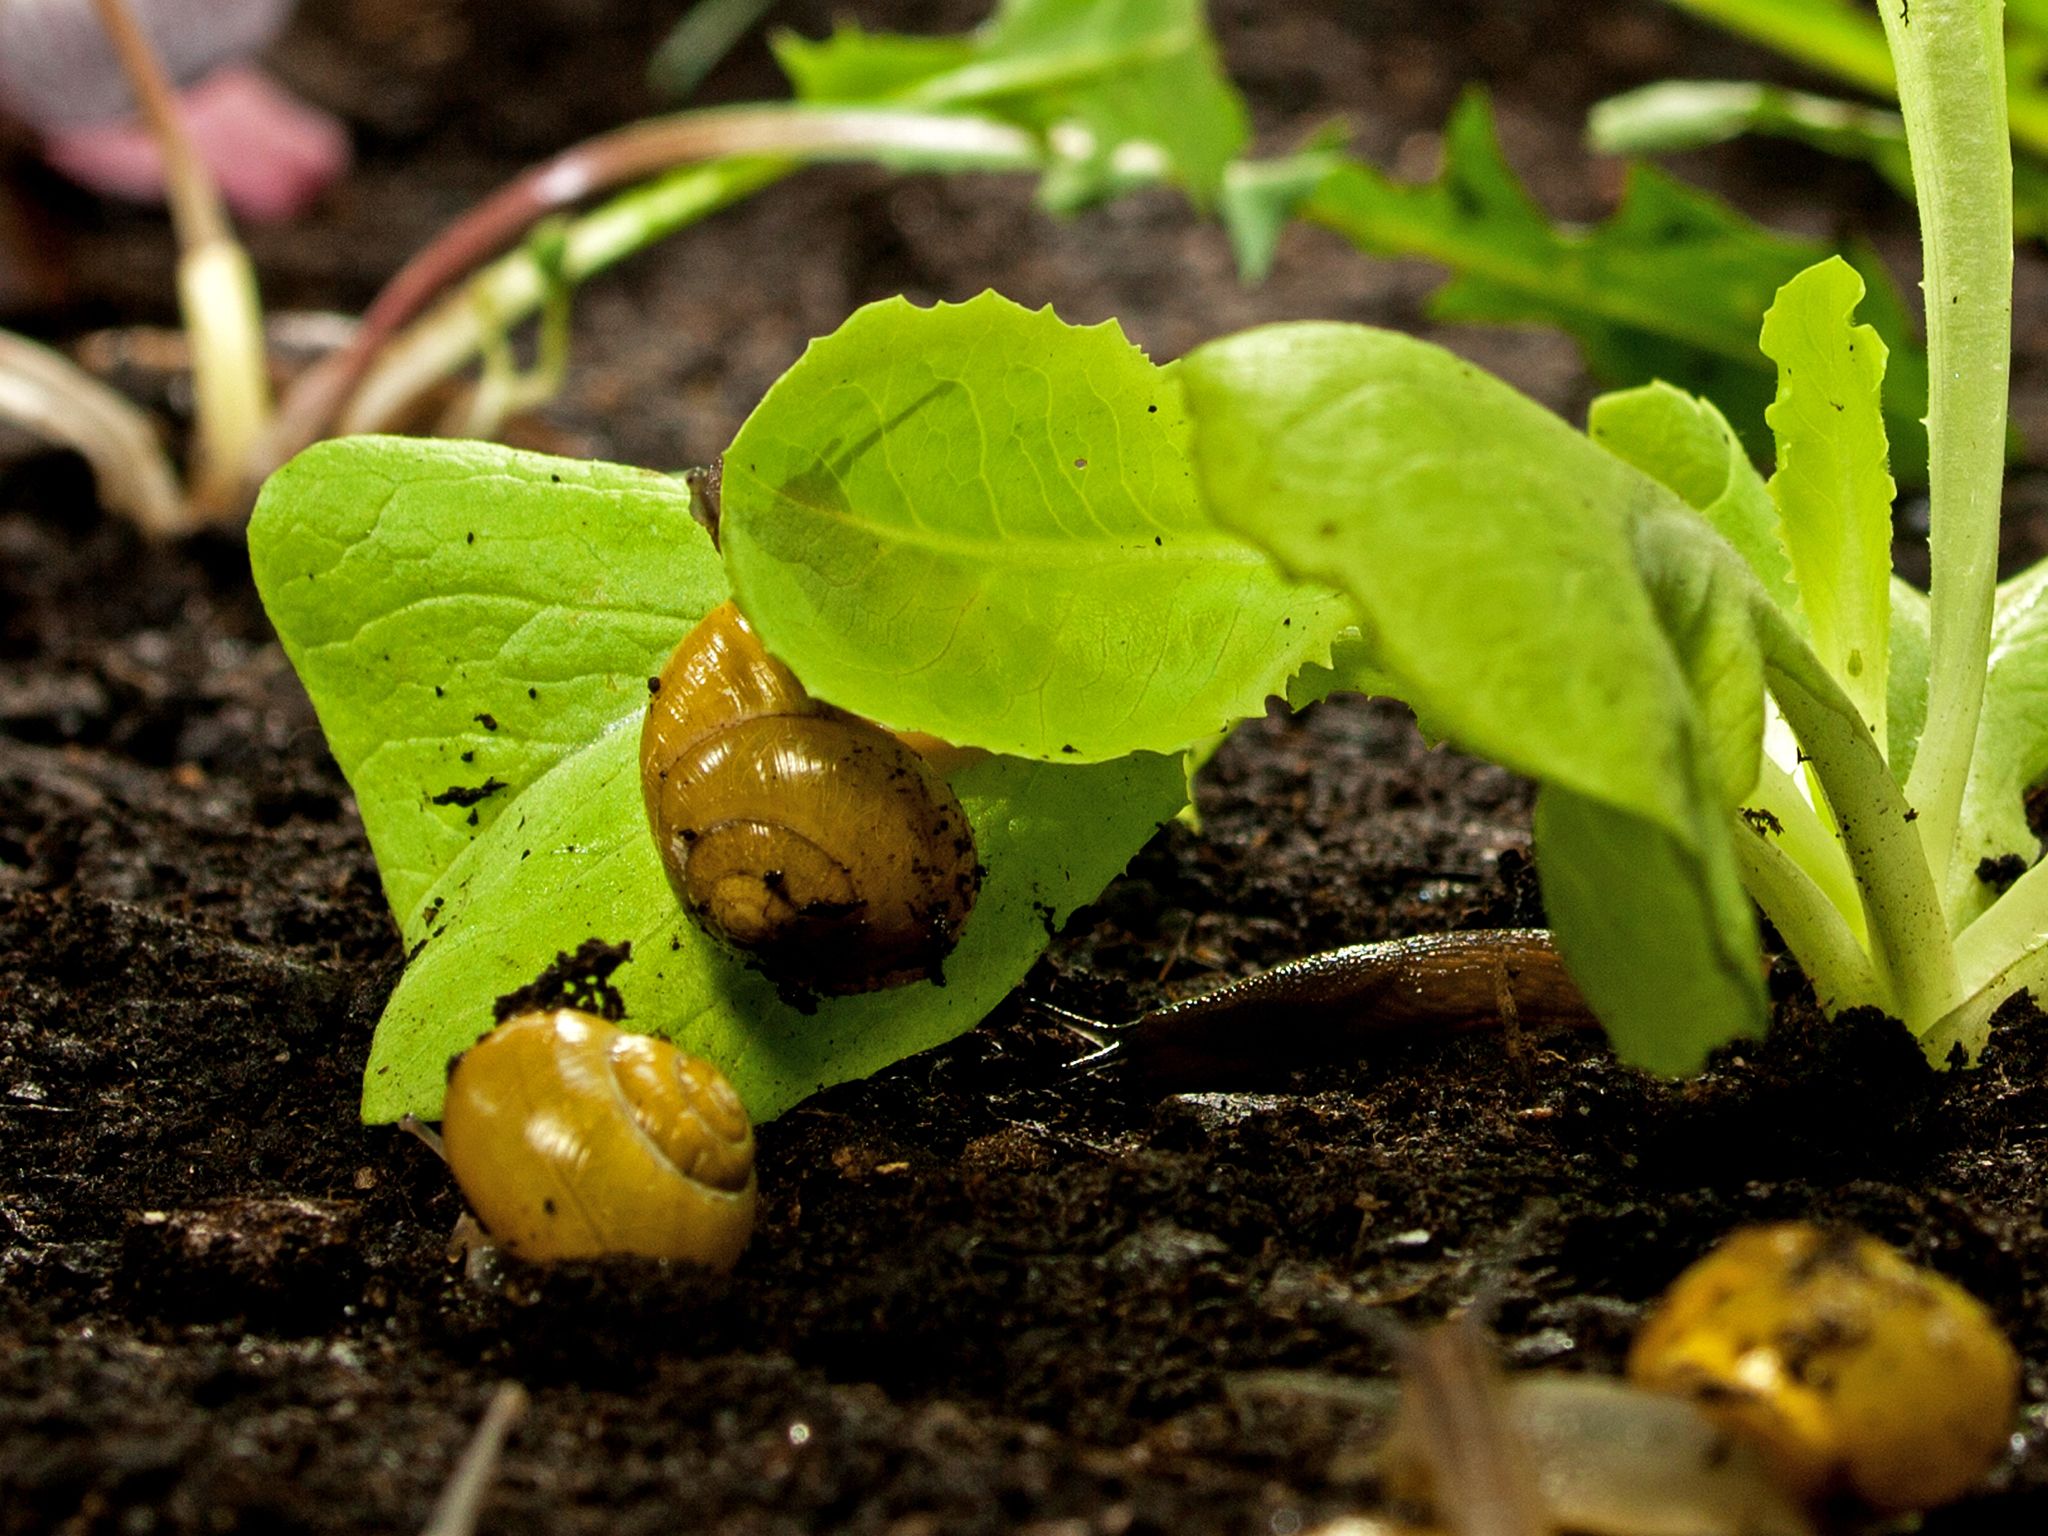 Snails on lettuce.This image is from Secret Garden. [Photo of the day - January 2015]